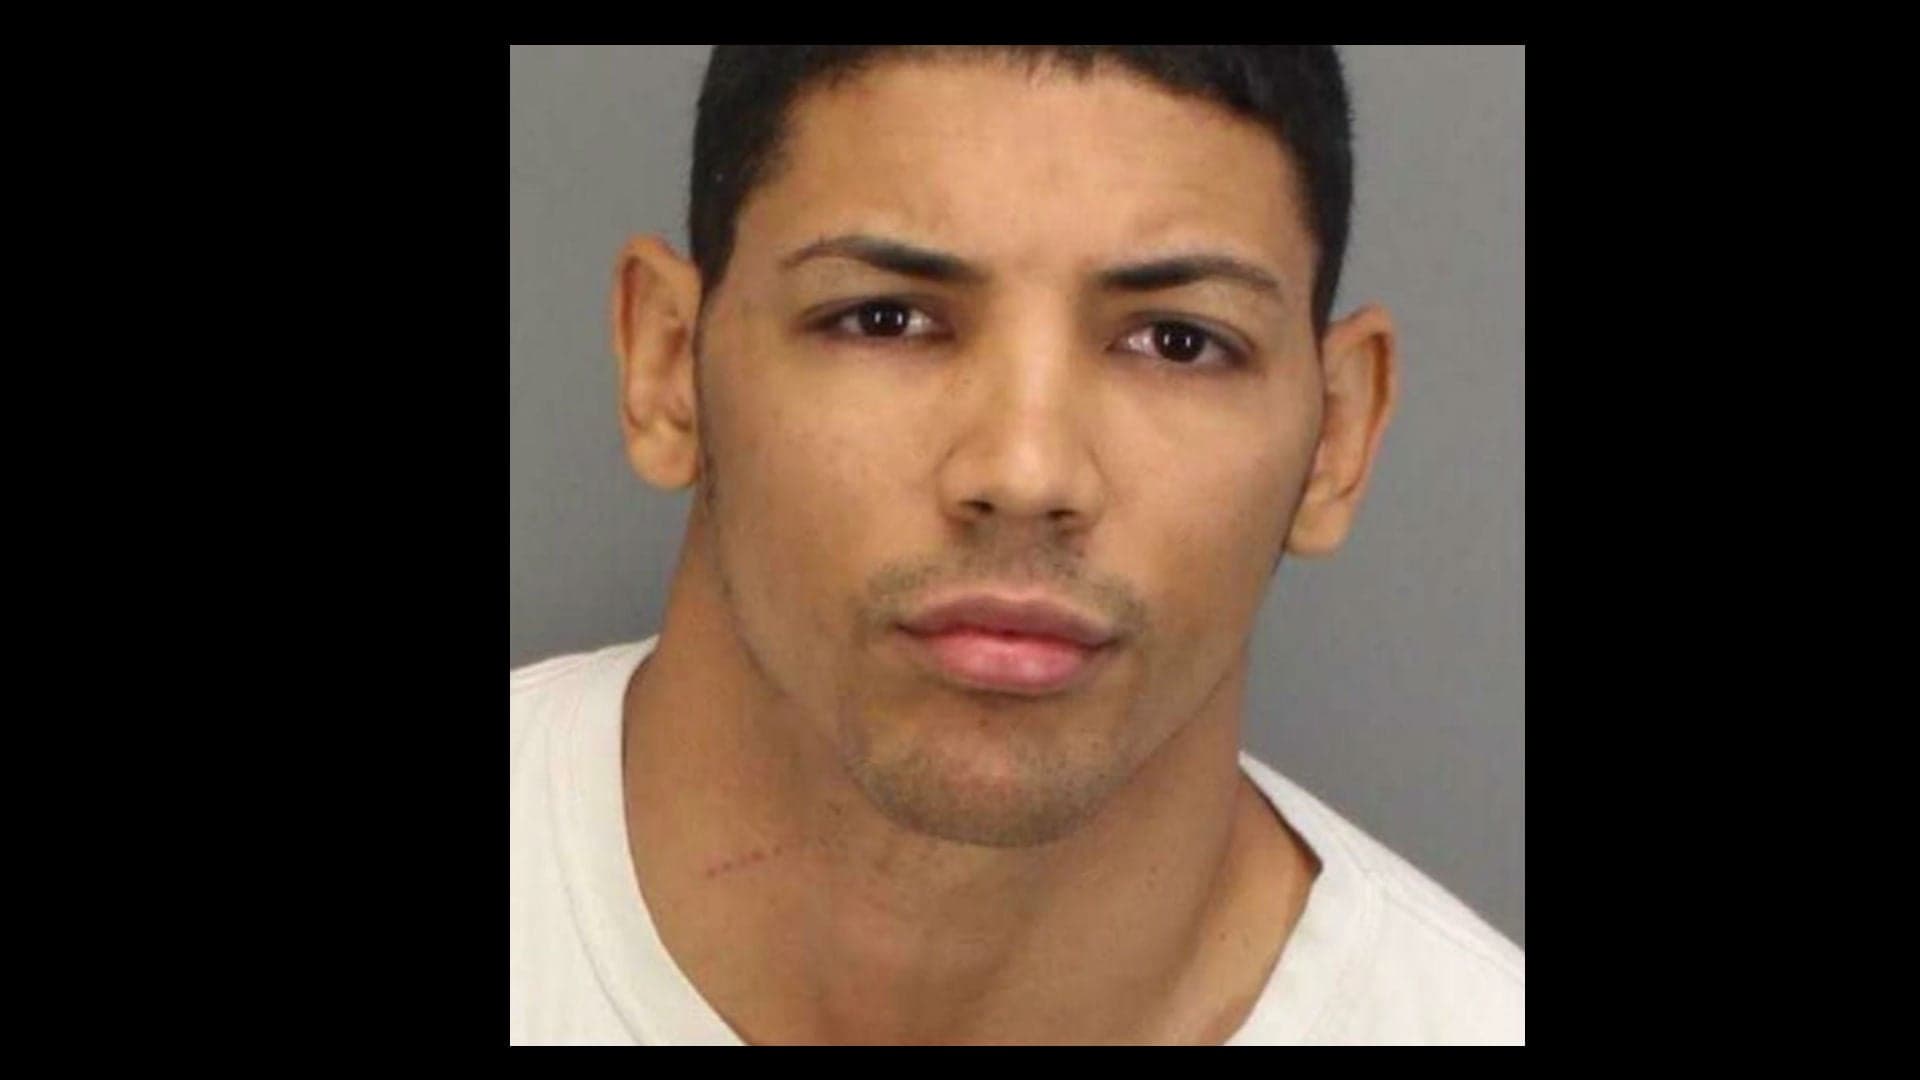 Professional Boxer Crashes Into and Kills Pregnant Woman While Allegedly Driving Drunk